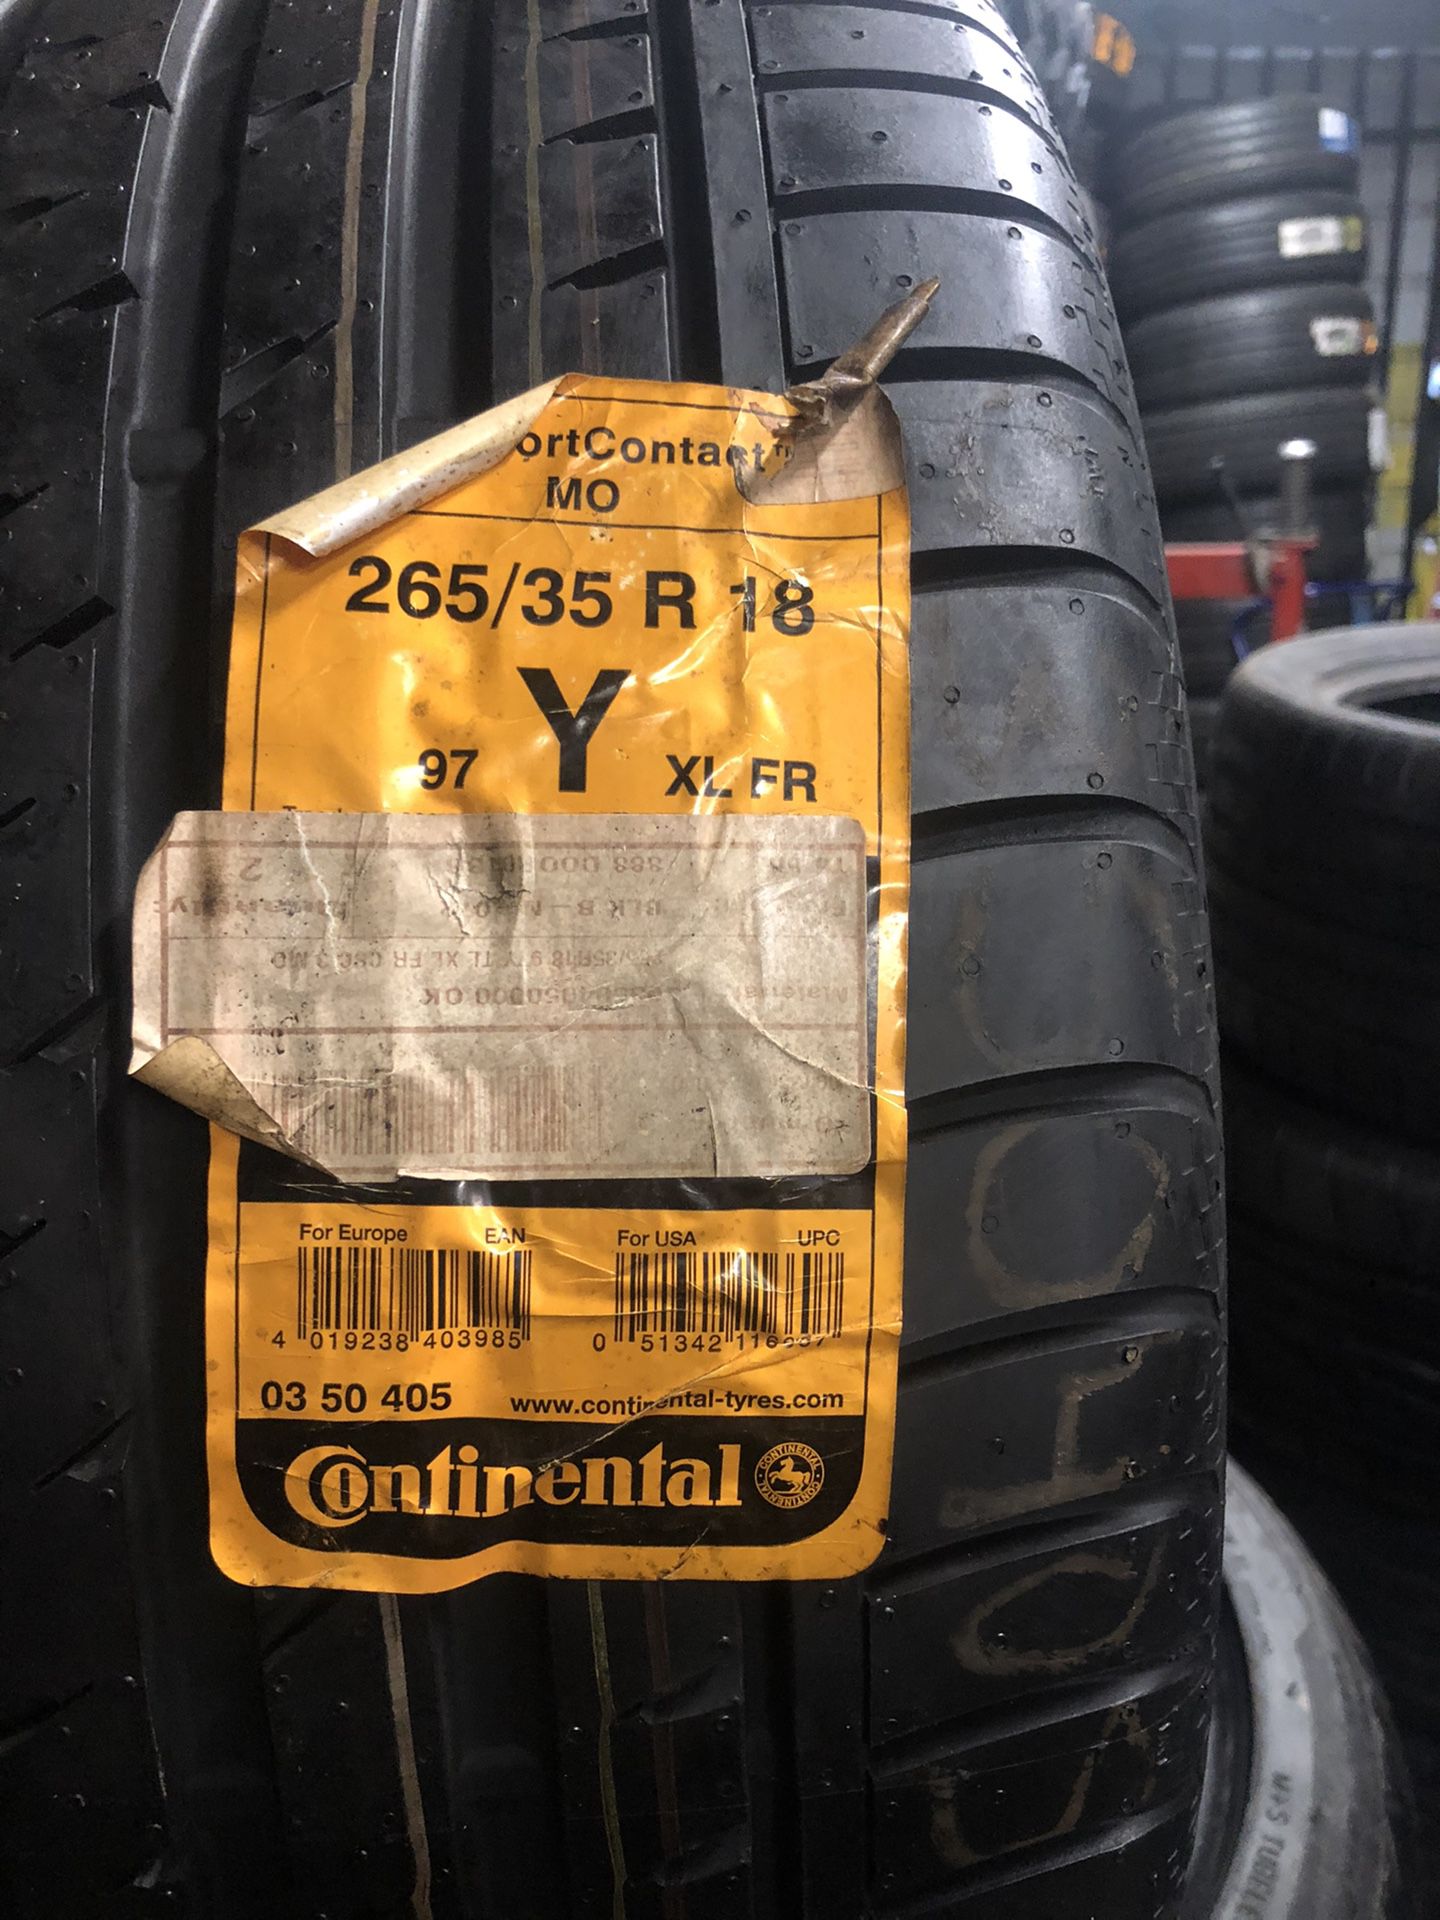 Only one 265/35r18